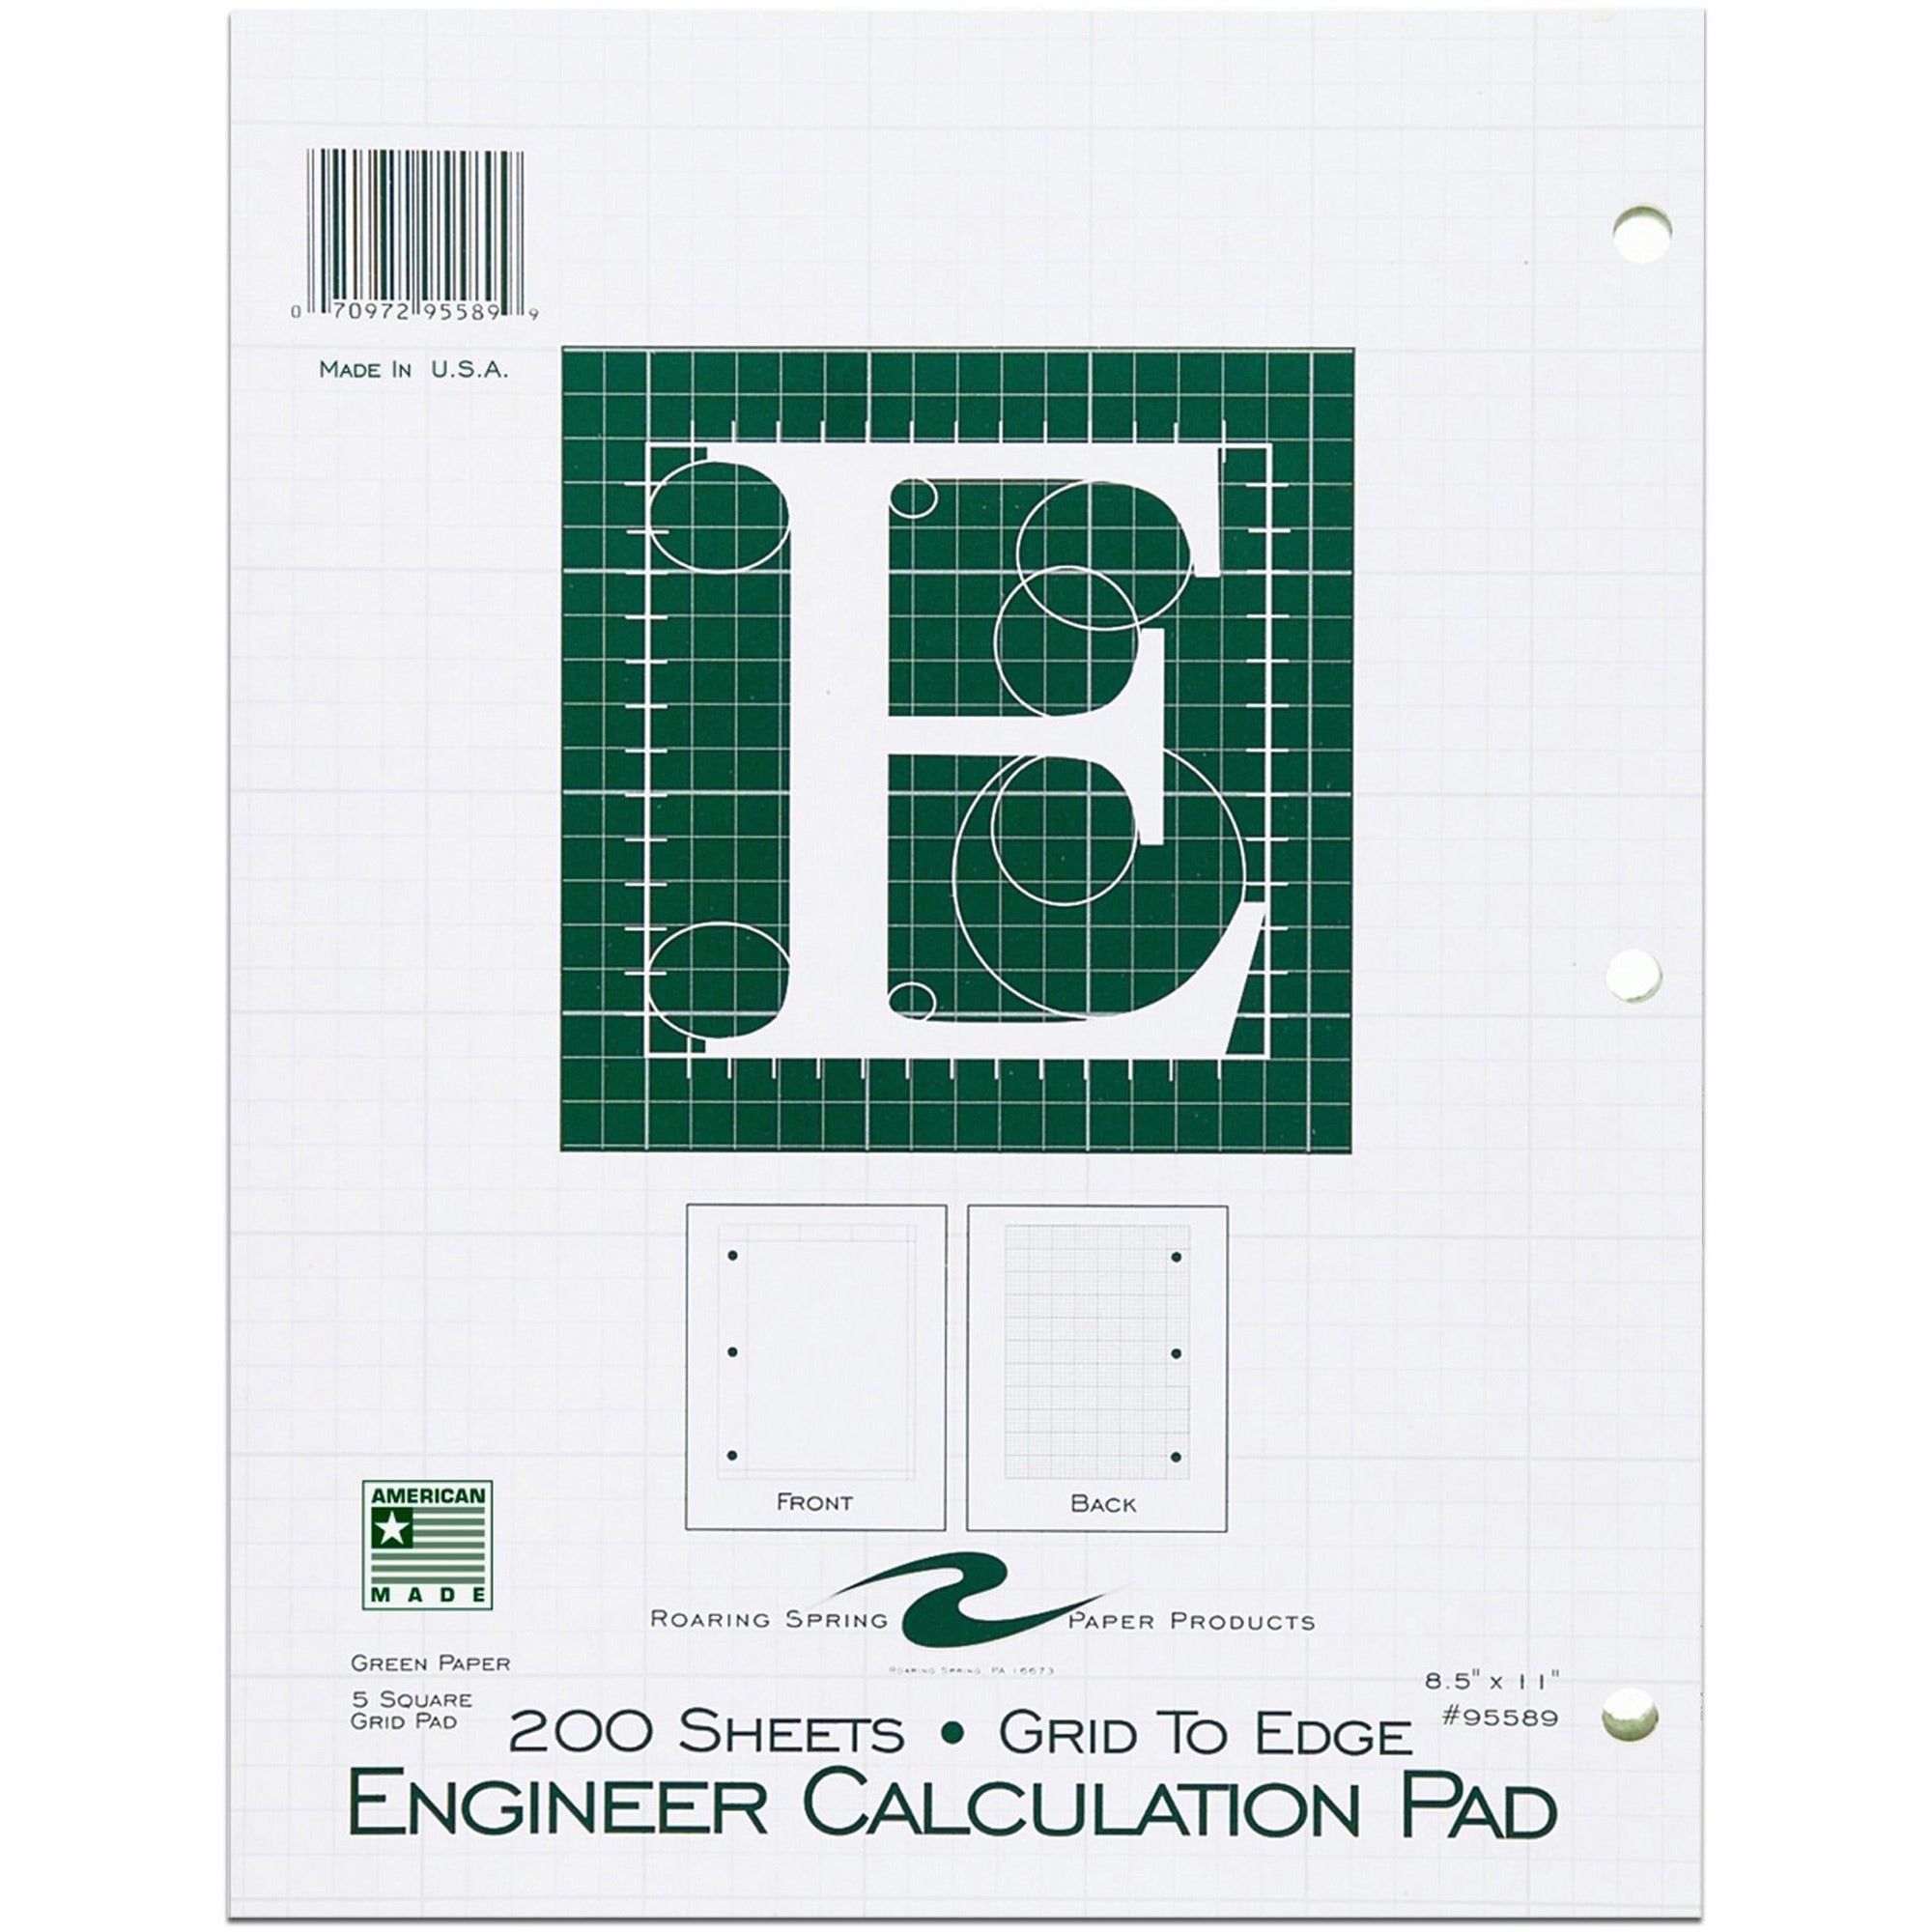 Roaring Spring 5x5 Grid Engineering Pad - 200 Sheets - 400 Pages - Printed - Glued - Back Ruling Surface - 3 Hole(s) - 15 lb Basis Weight - 56 g/m2 Grammage - 11" x 8 1/2" - 0.66" x 8.5" x 11" - Green Paper - Chipboard Cover - 1 Each - 